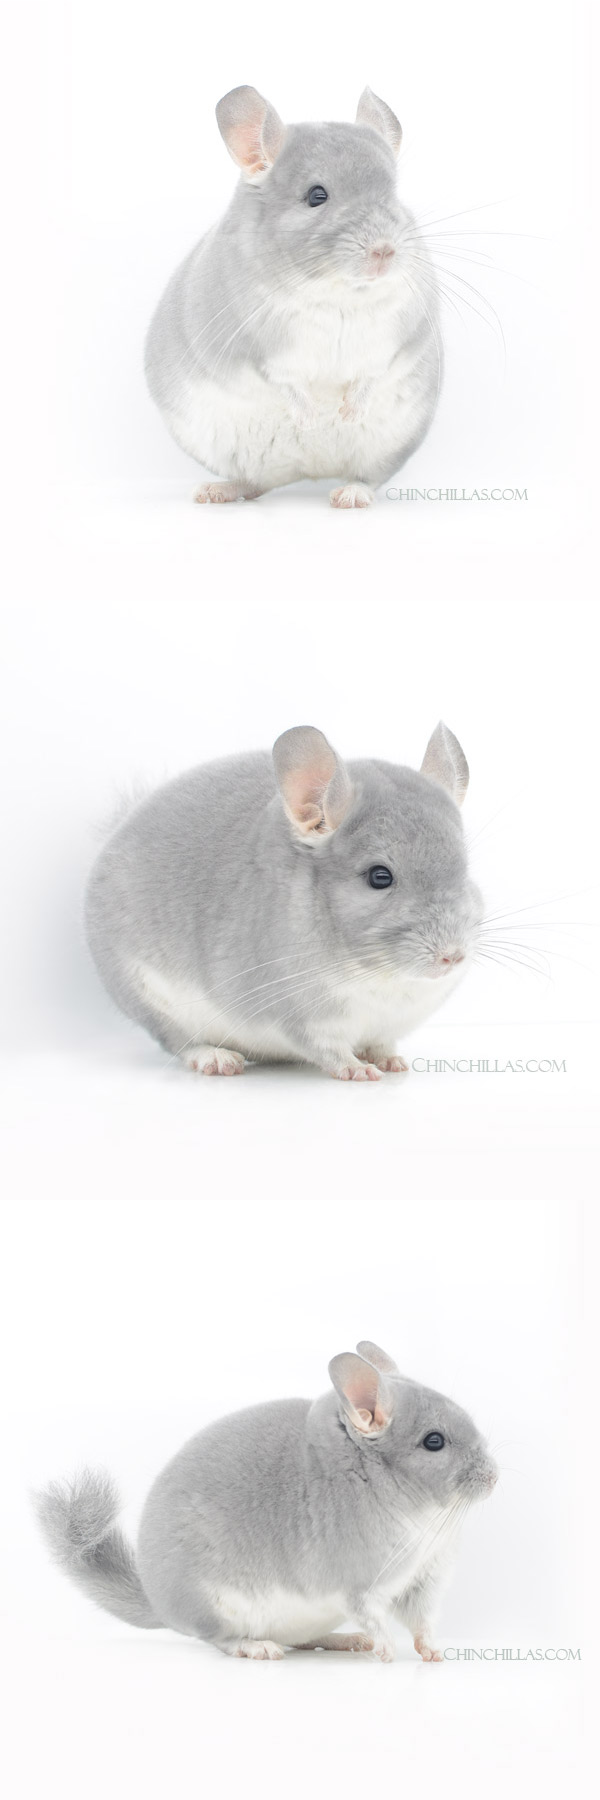 Chinchilla or related item offered for sale or export on Chinchillas.com - 22198 Show Quality Blue Diamond Female Chinchilla